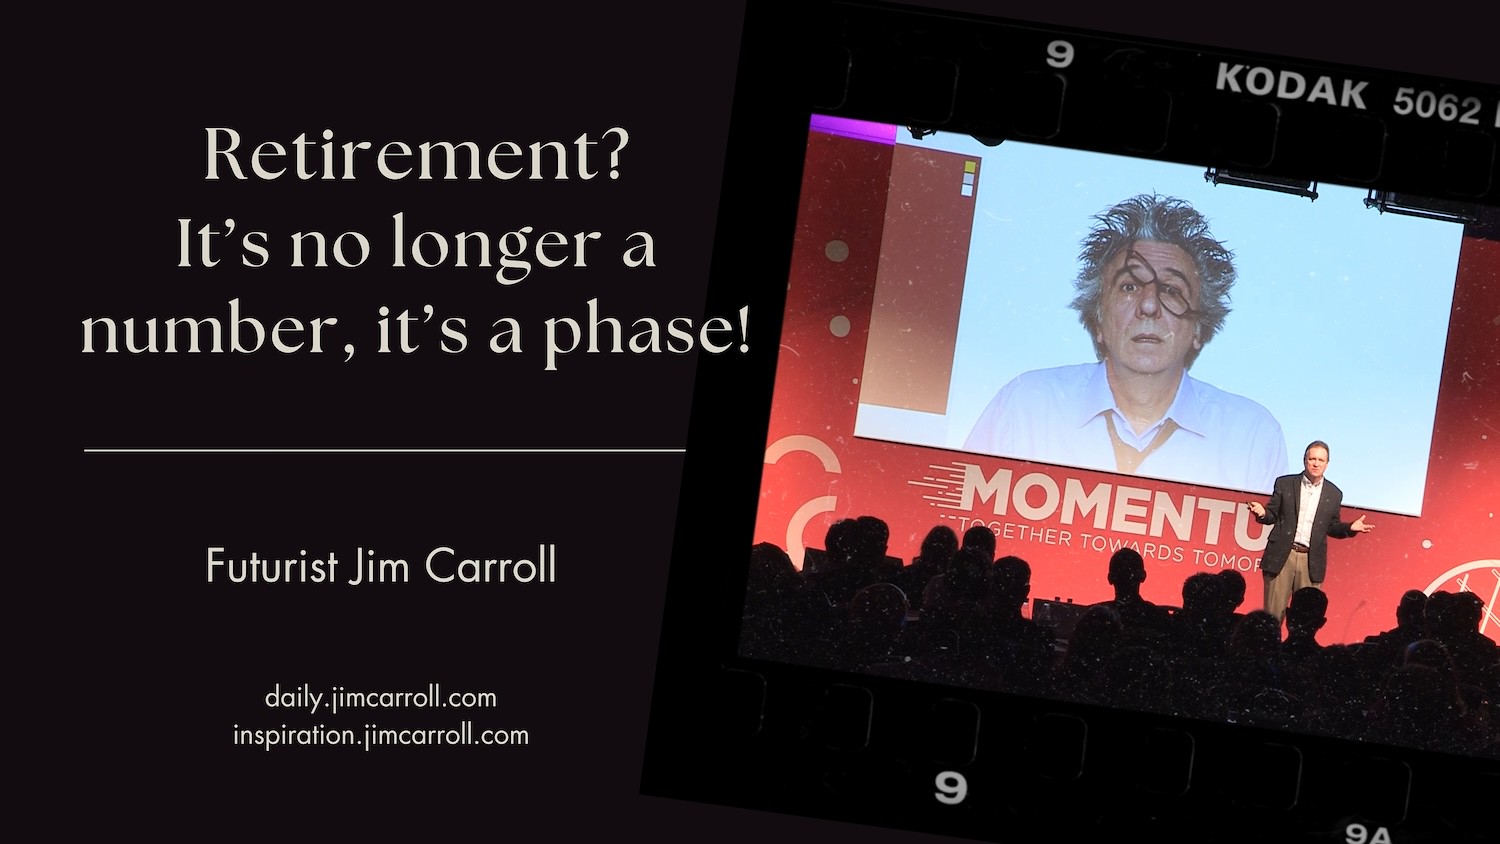 "Retirement? It's no longer a number, it's a phase!" - Futurist Jim Carroll